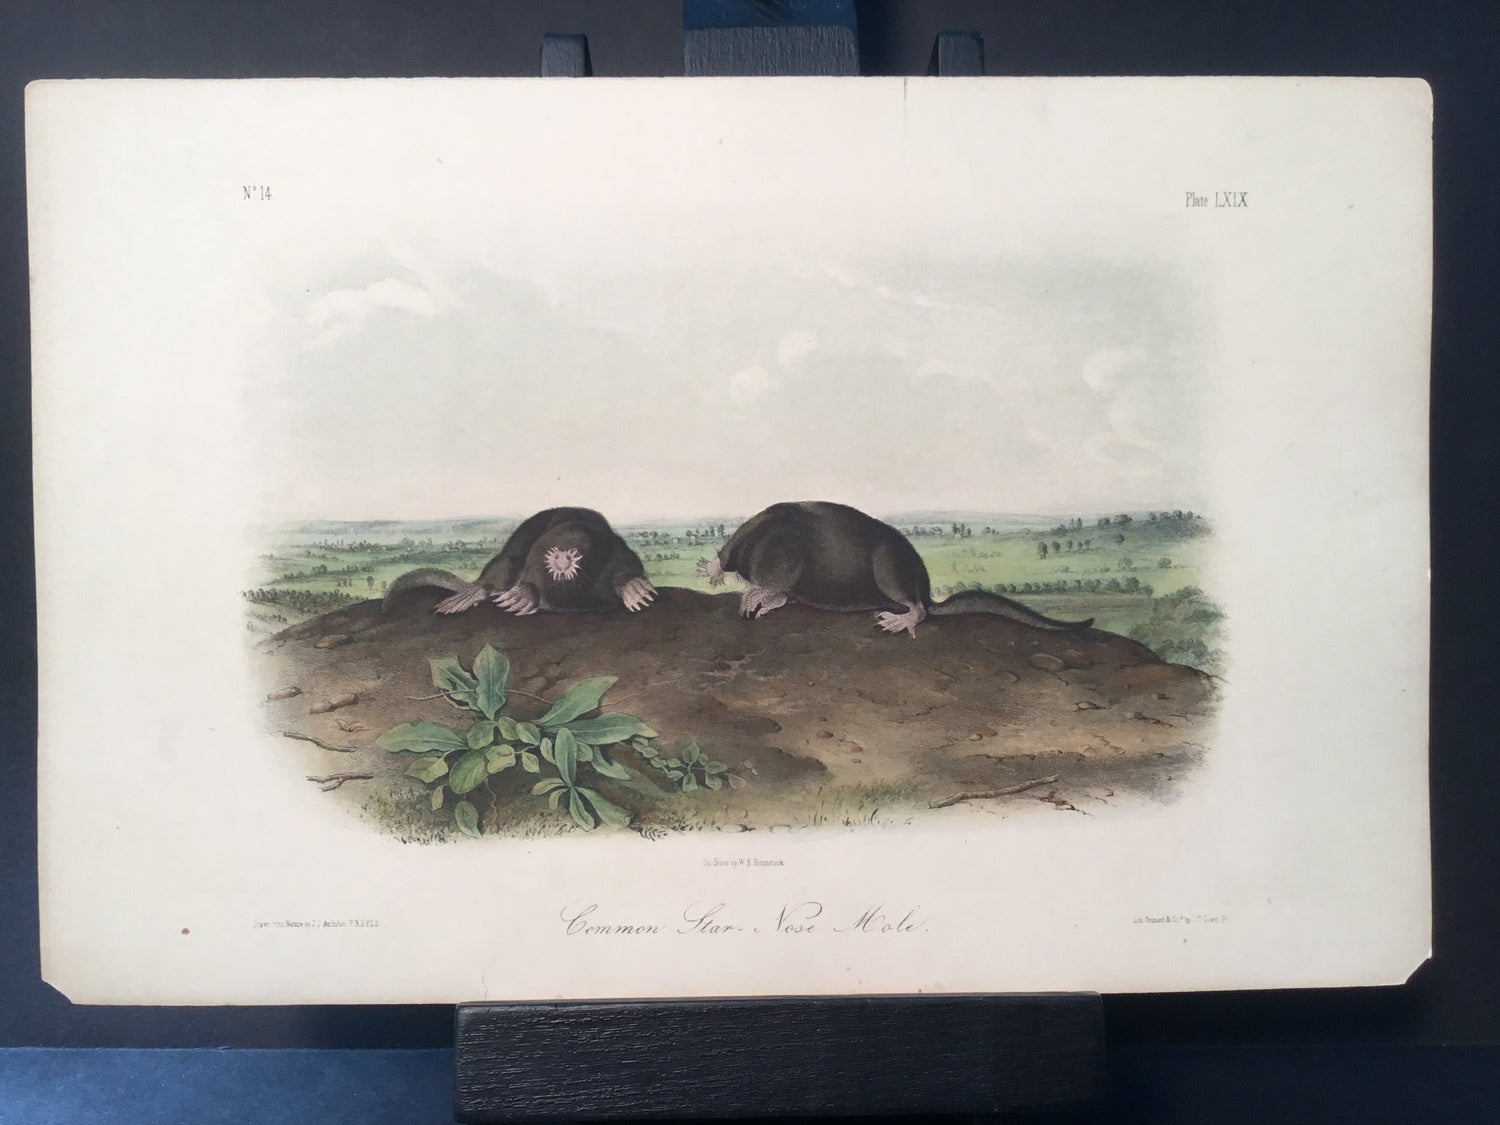 Lord-Hopkins Collection - Common Star Nose Mole